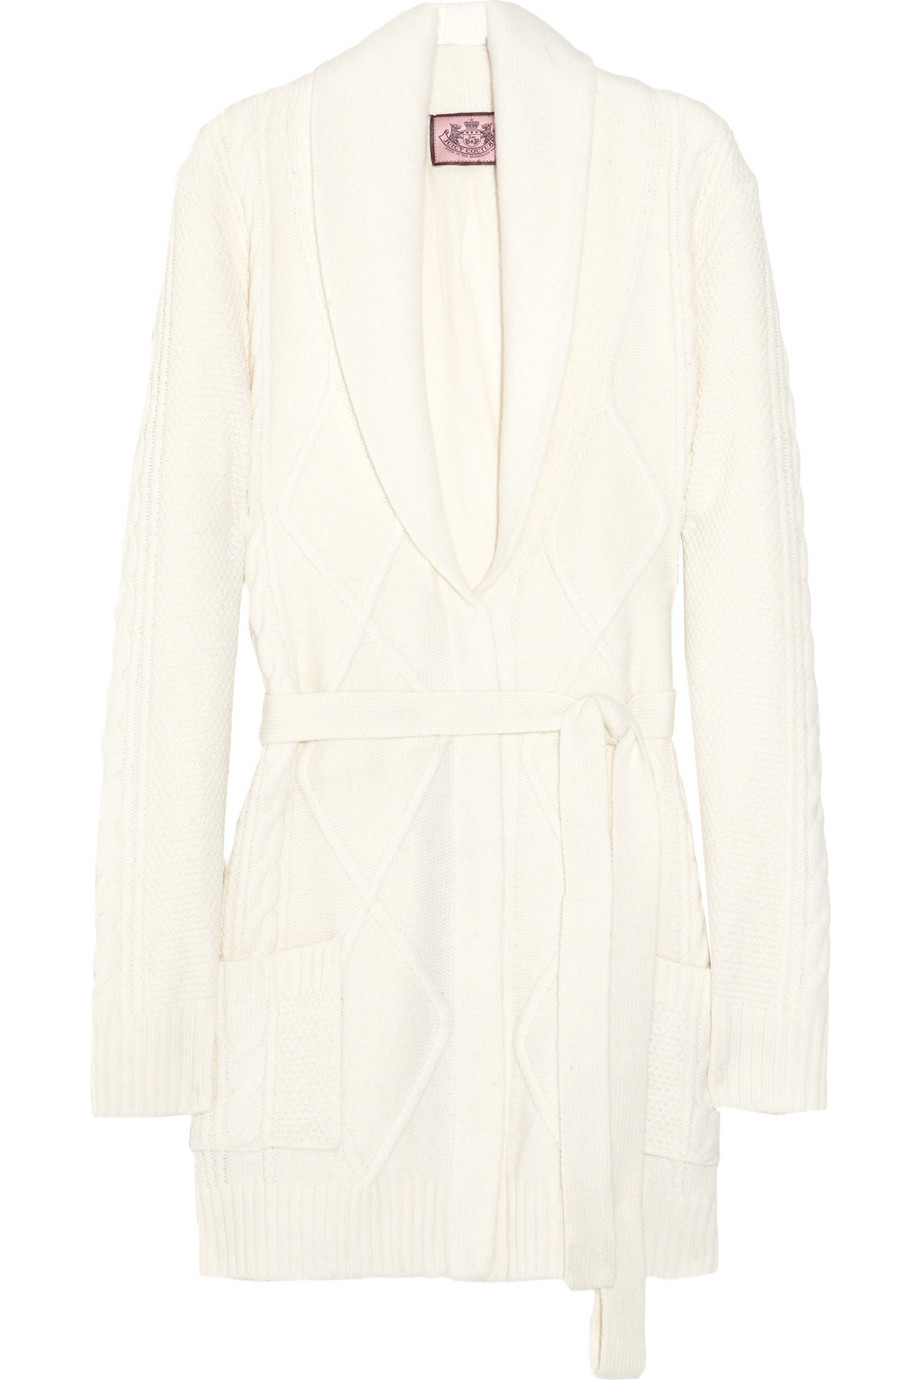 Juicy Couture Cable-knit Belted Robe in White | Lyst